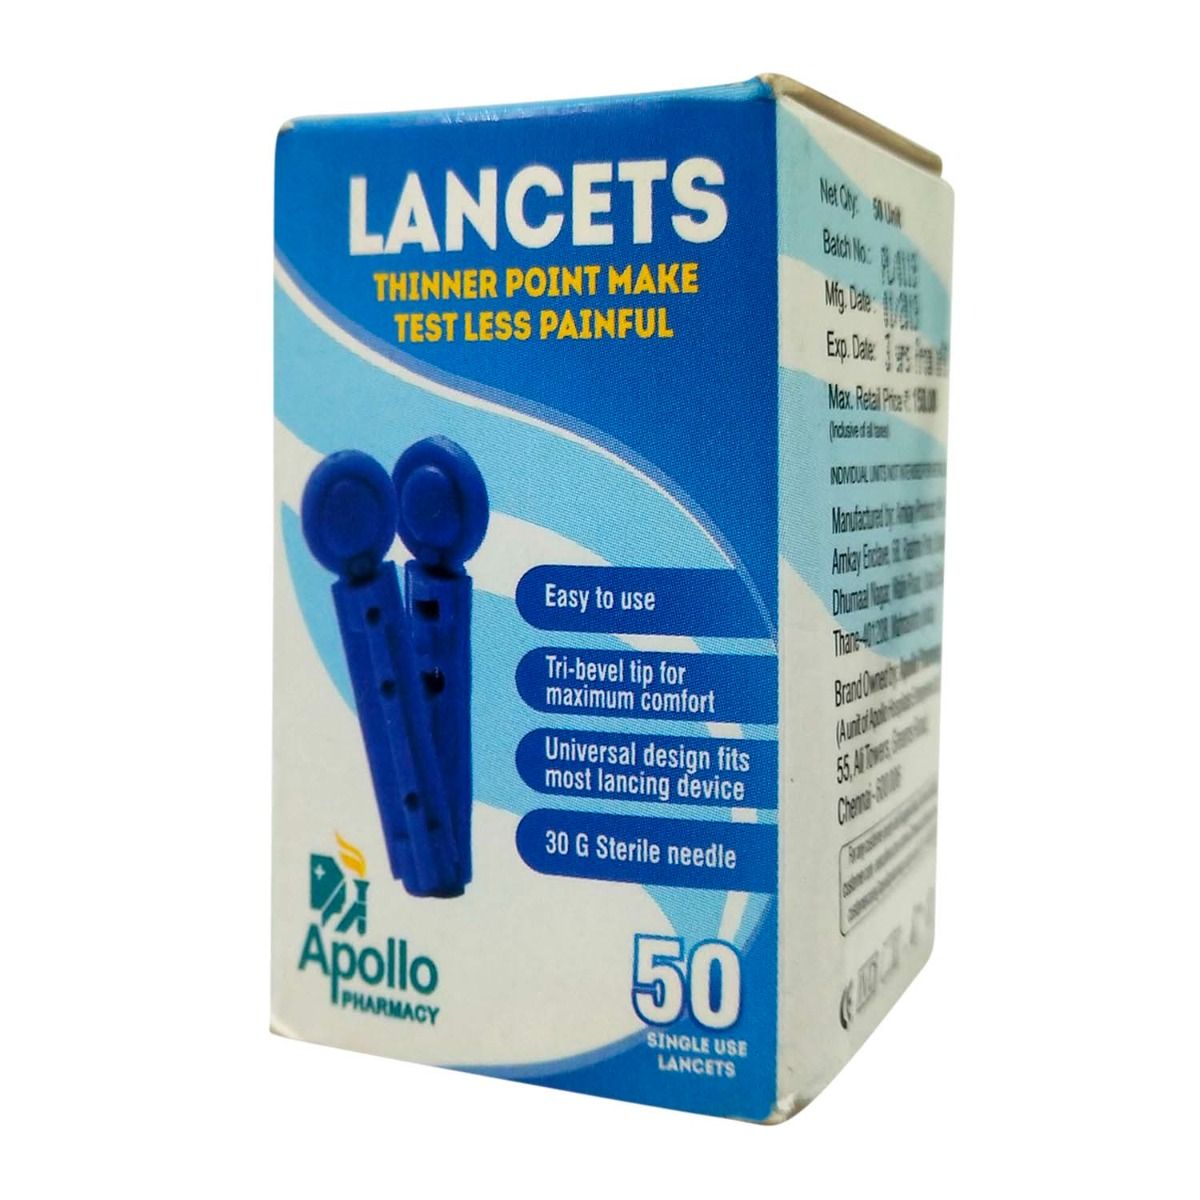 Apollo Pharmacy Lancets, 50 Count, Pack of 1 